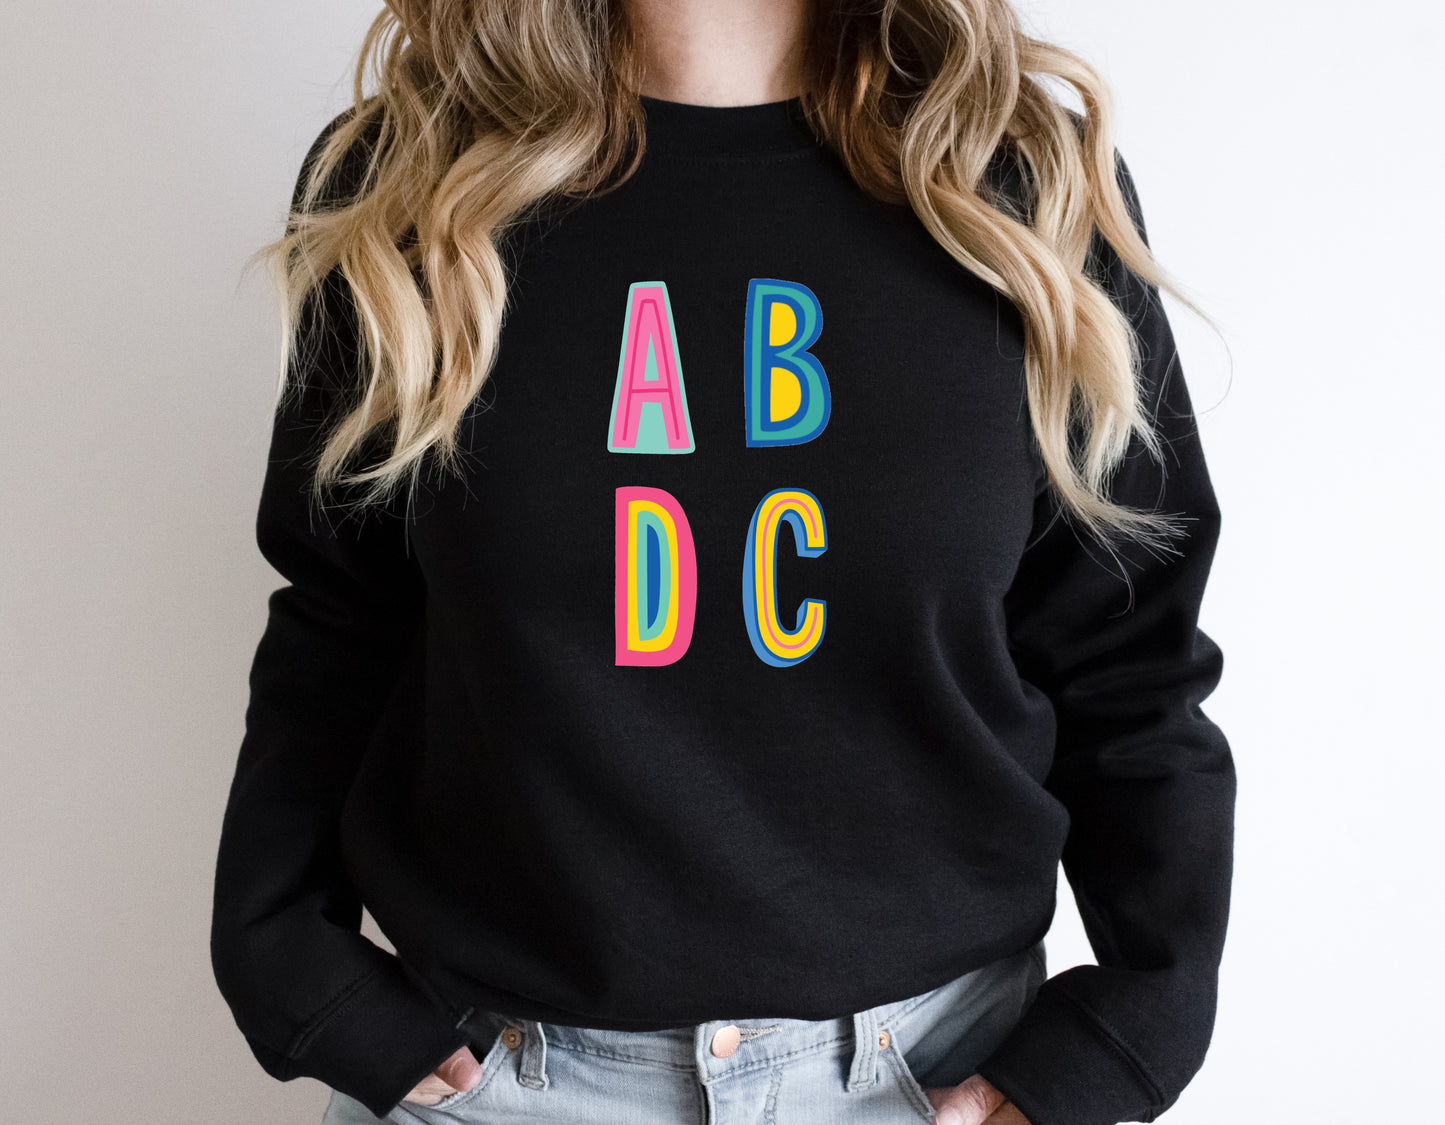 ABDC Colorful Graphic Tee